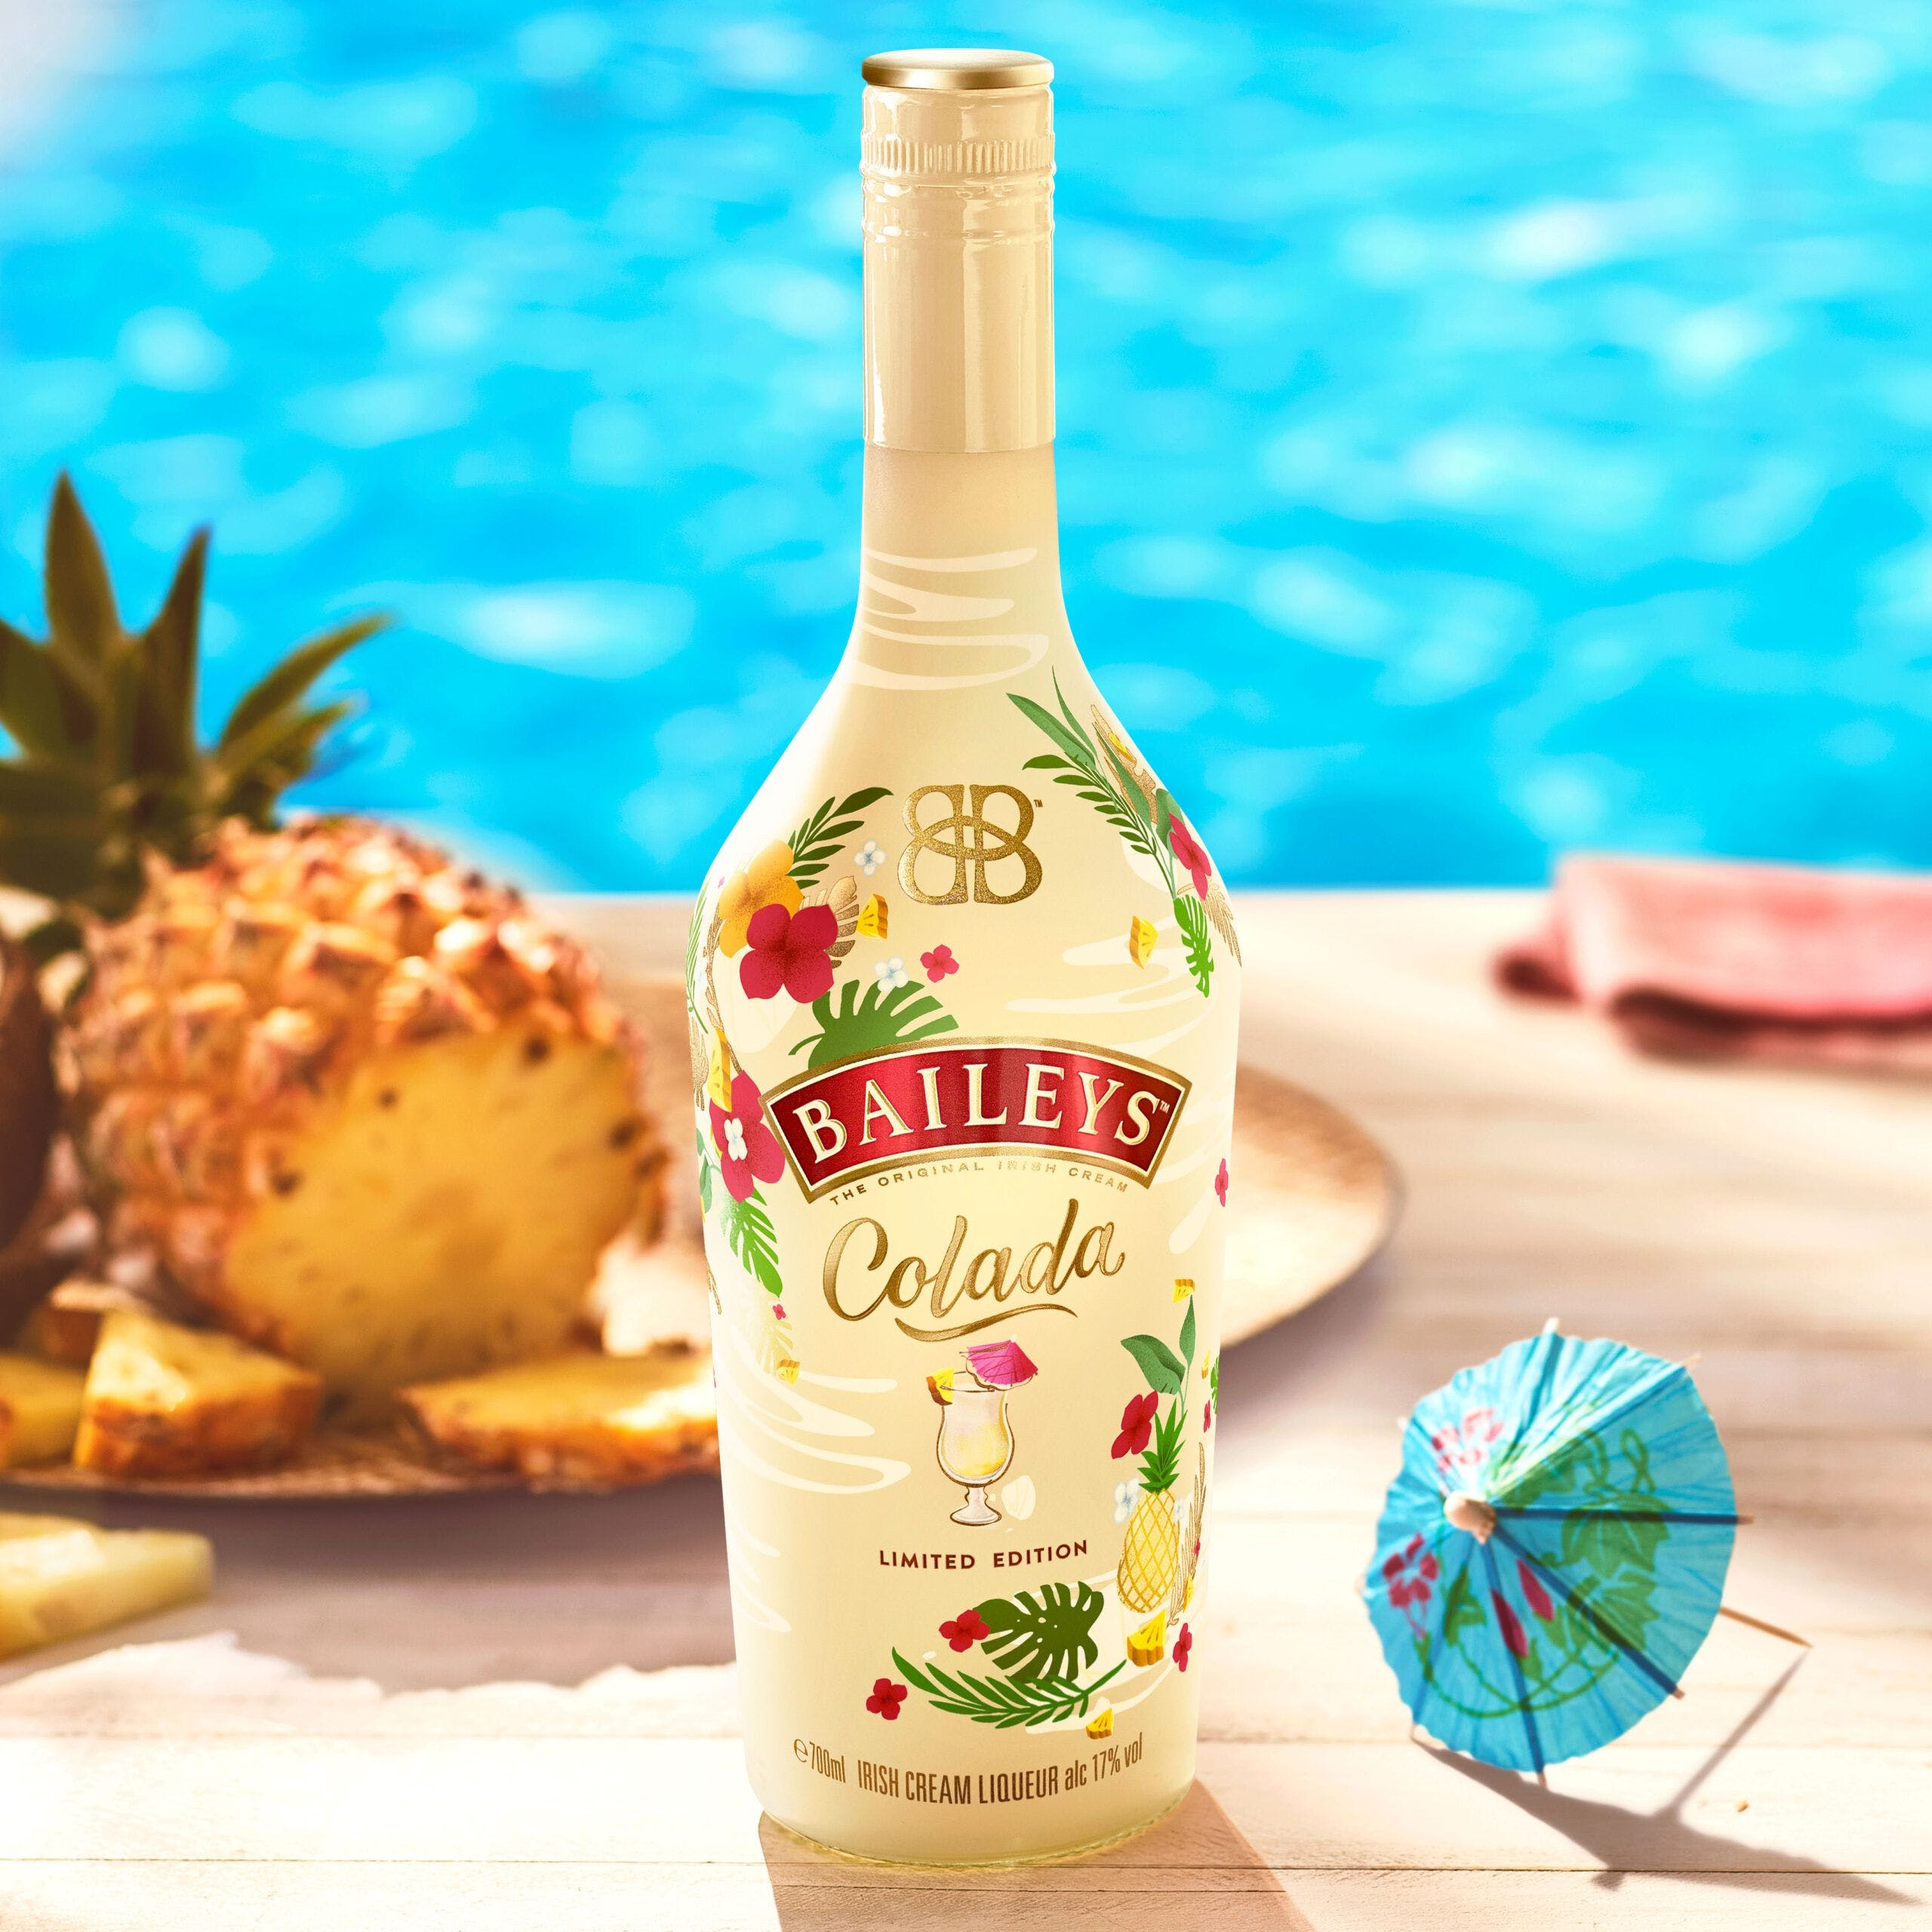 Baileys Colada Coco - from has House Available Of Bottle NOW the in UK! The arrived Club